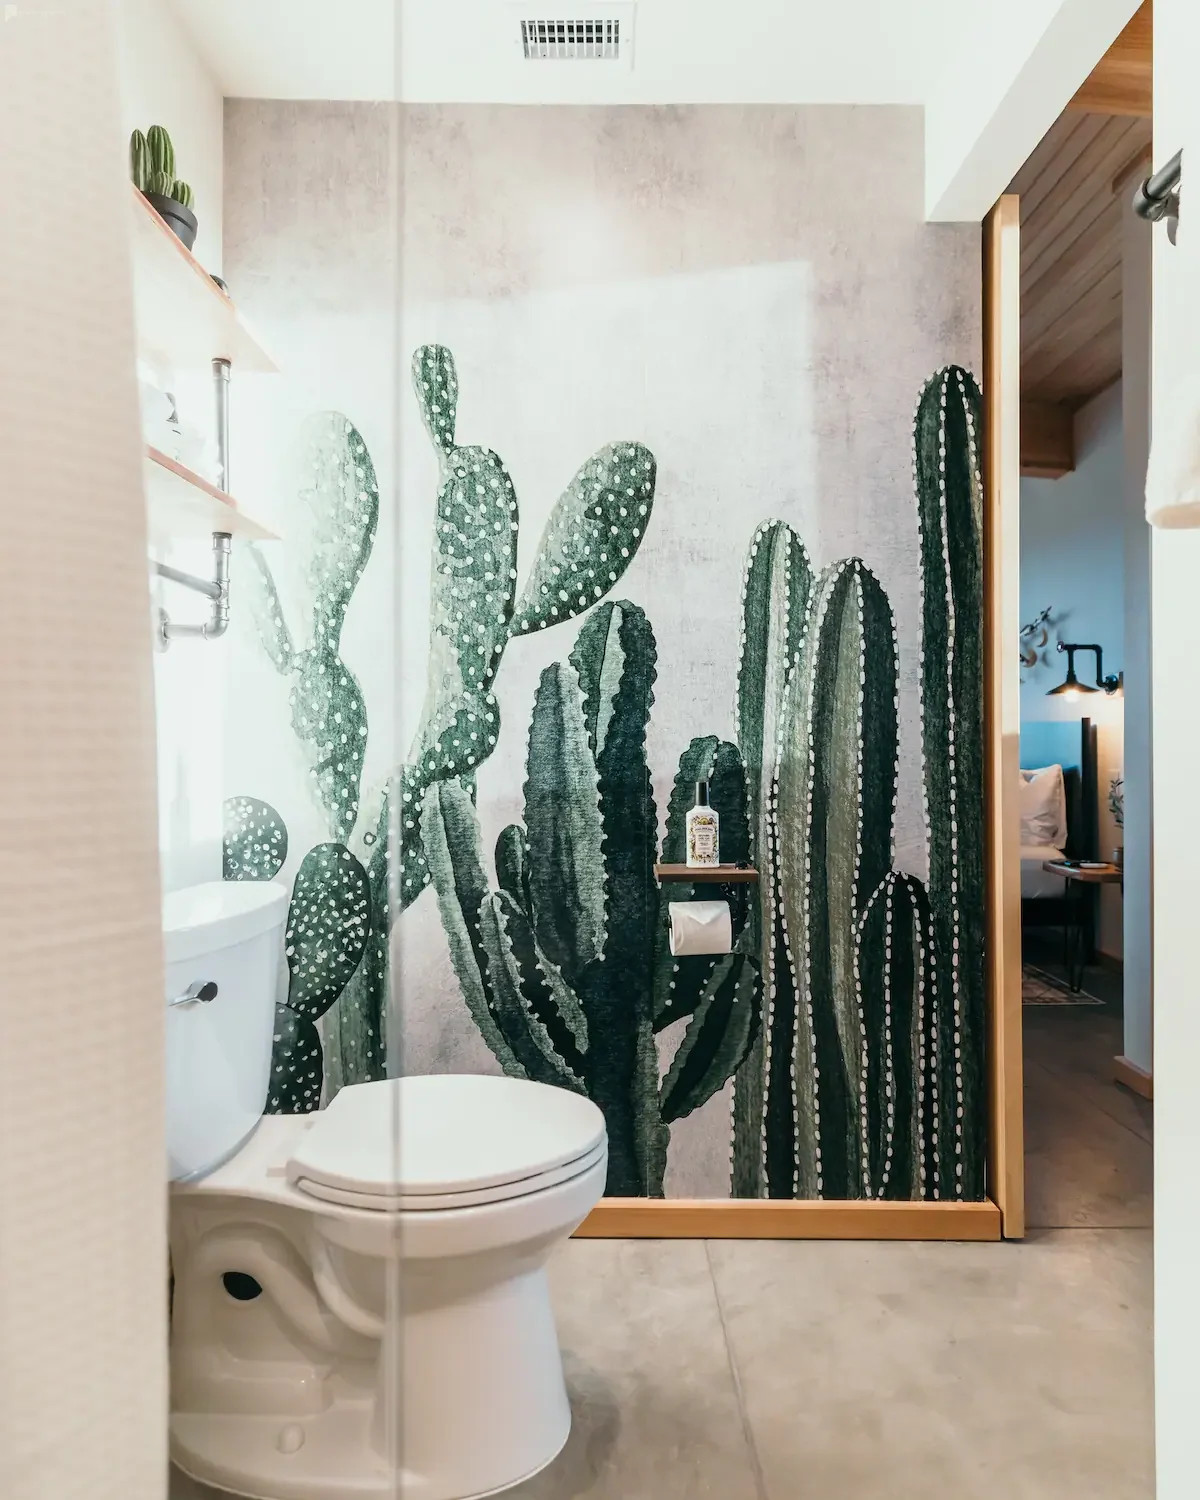 Toilet with cactus wallpaper